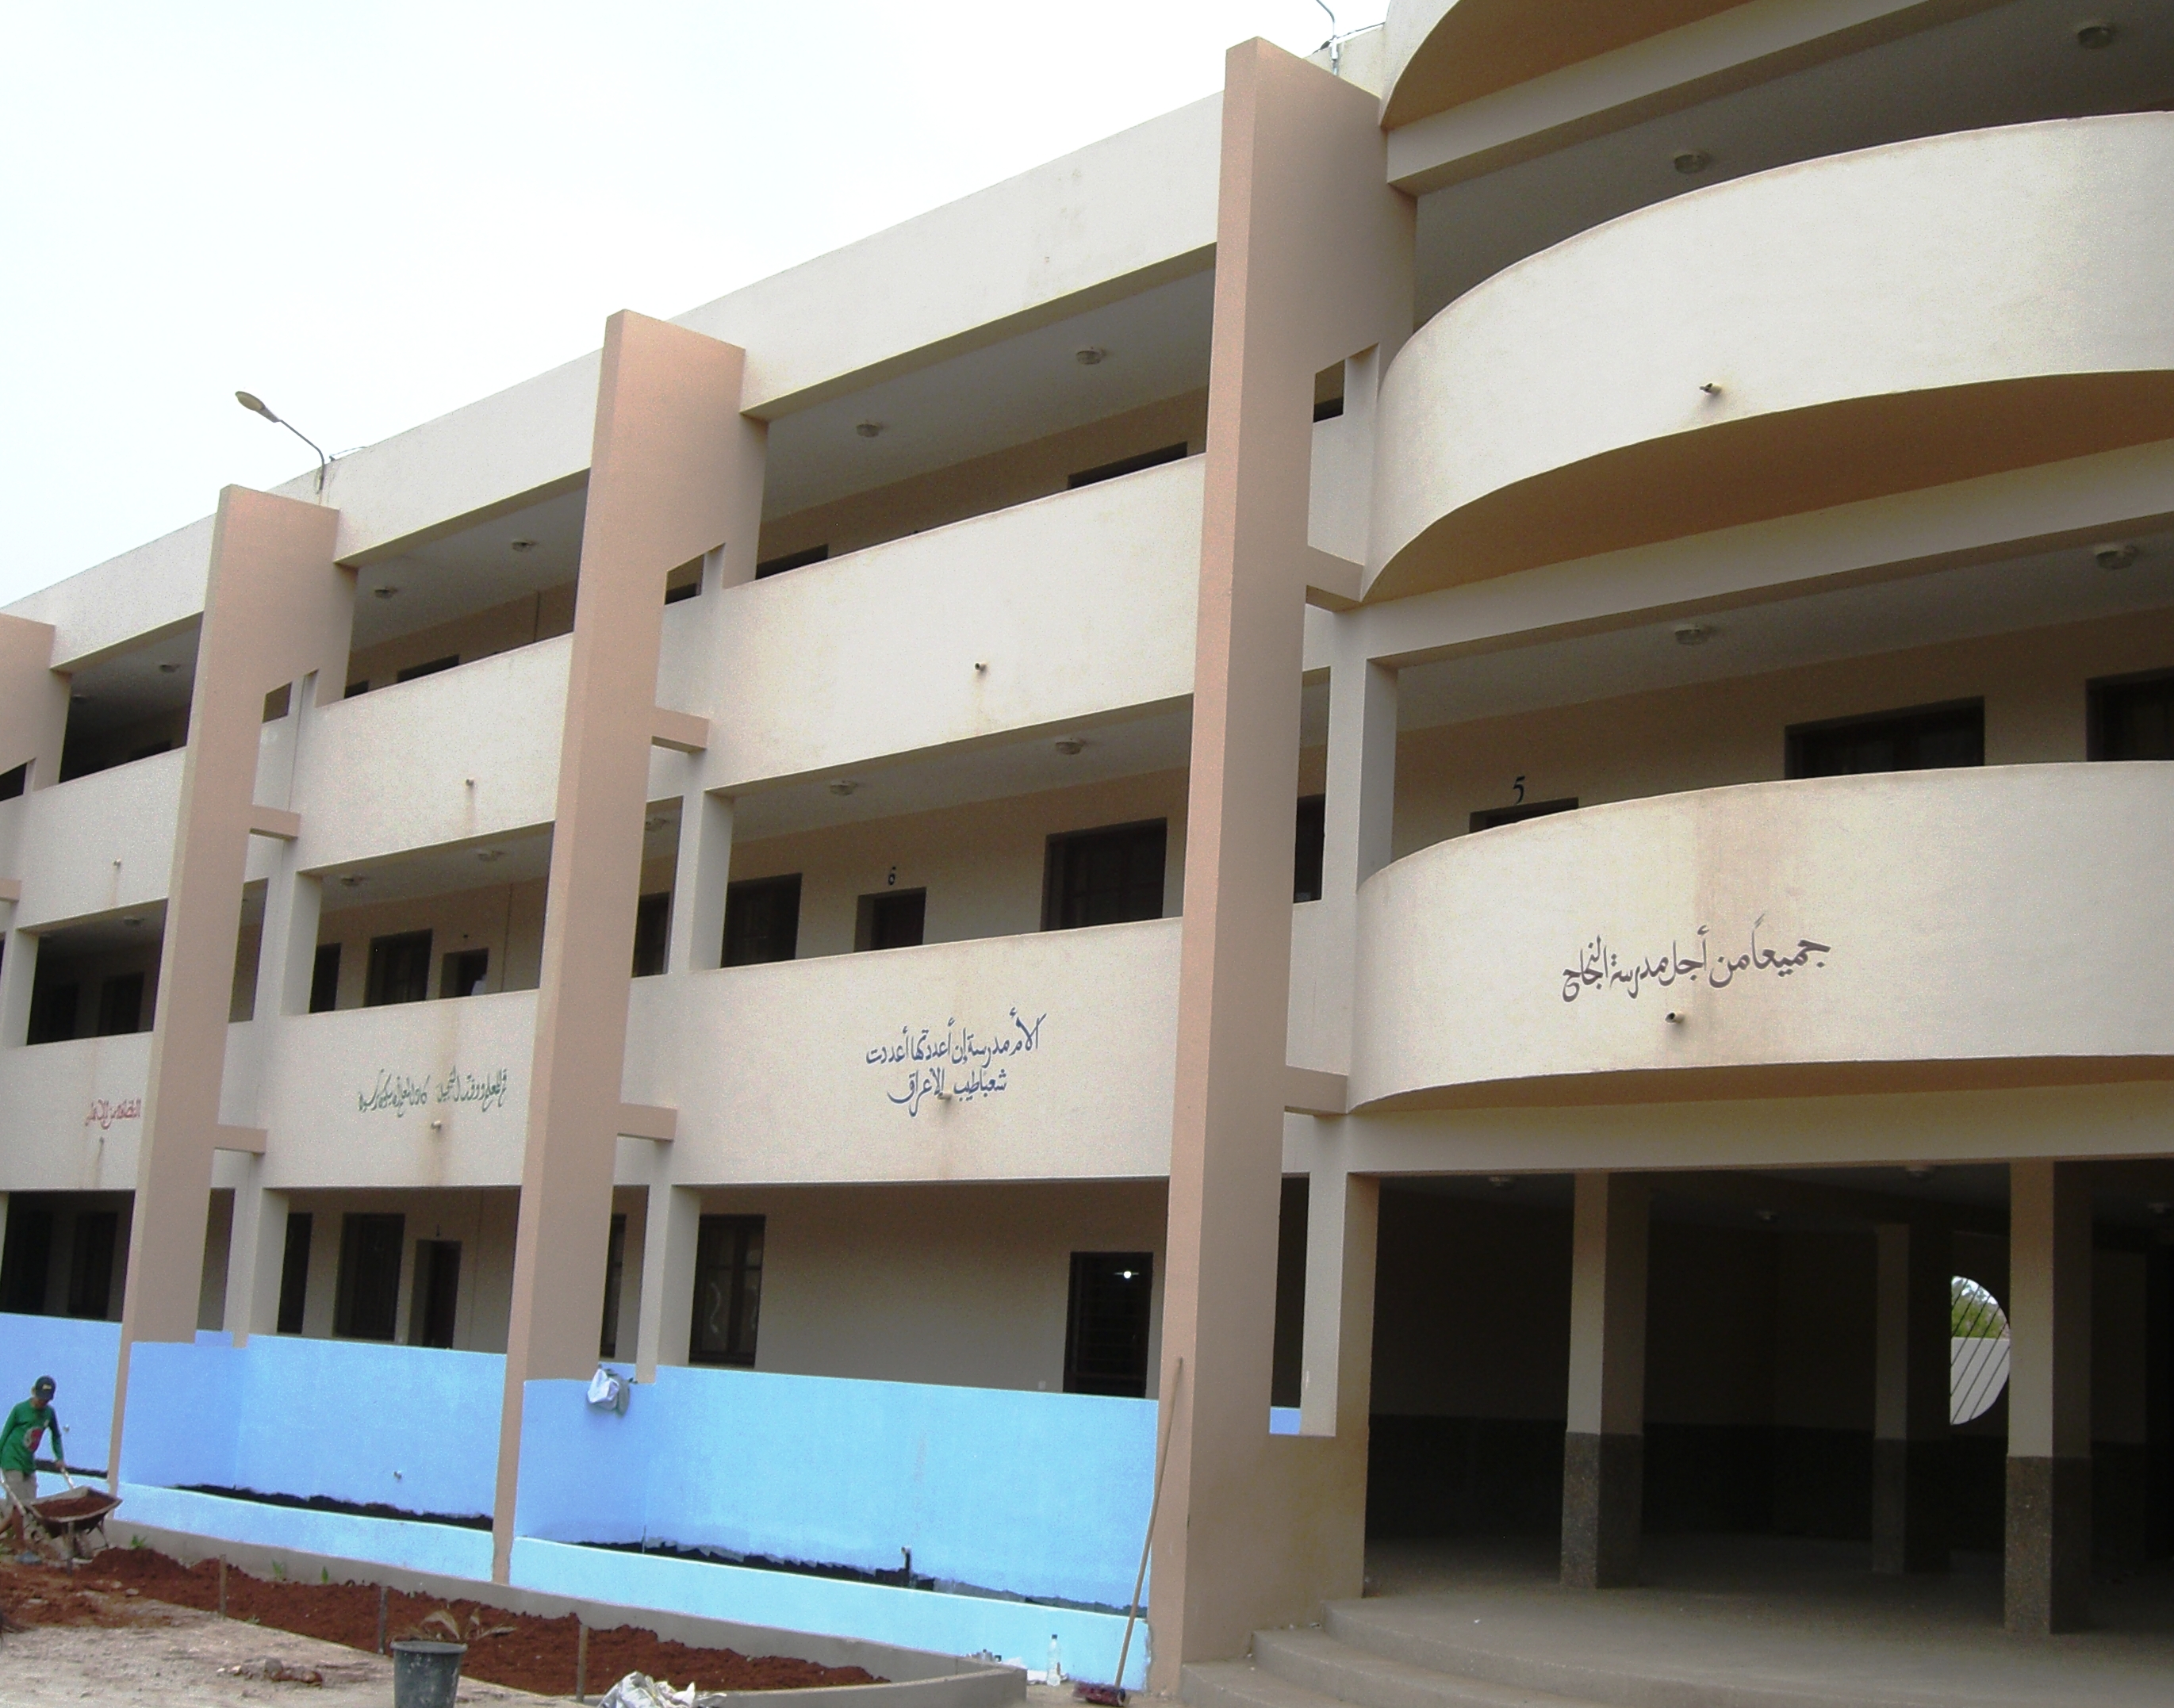 Construction of new school building in Ouled Ahmed